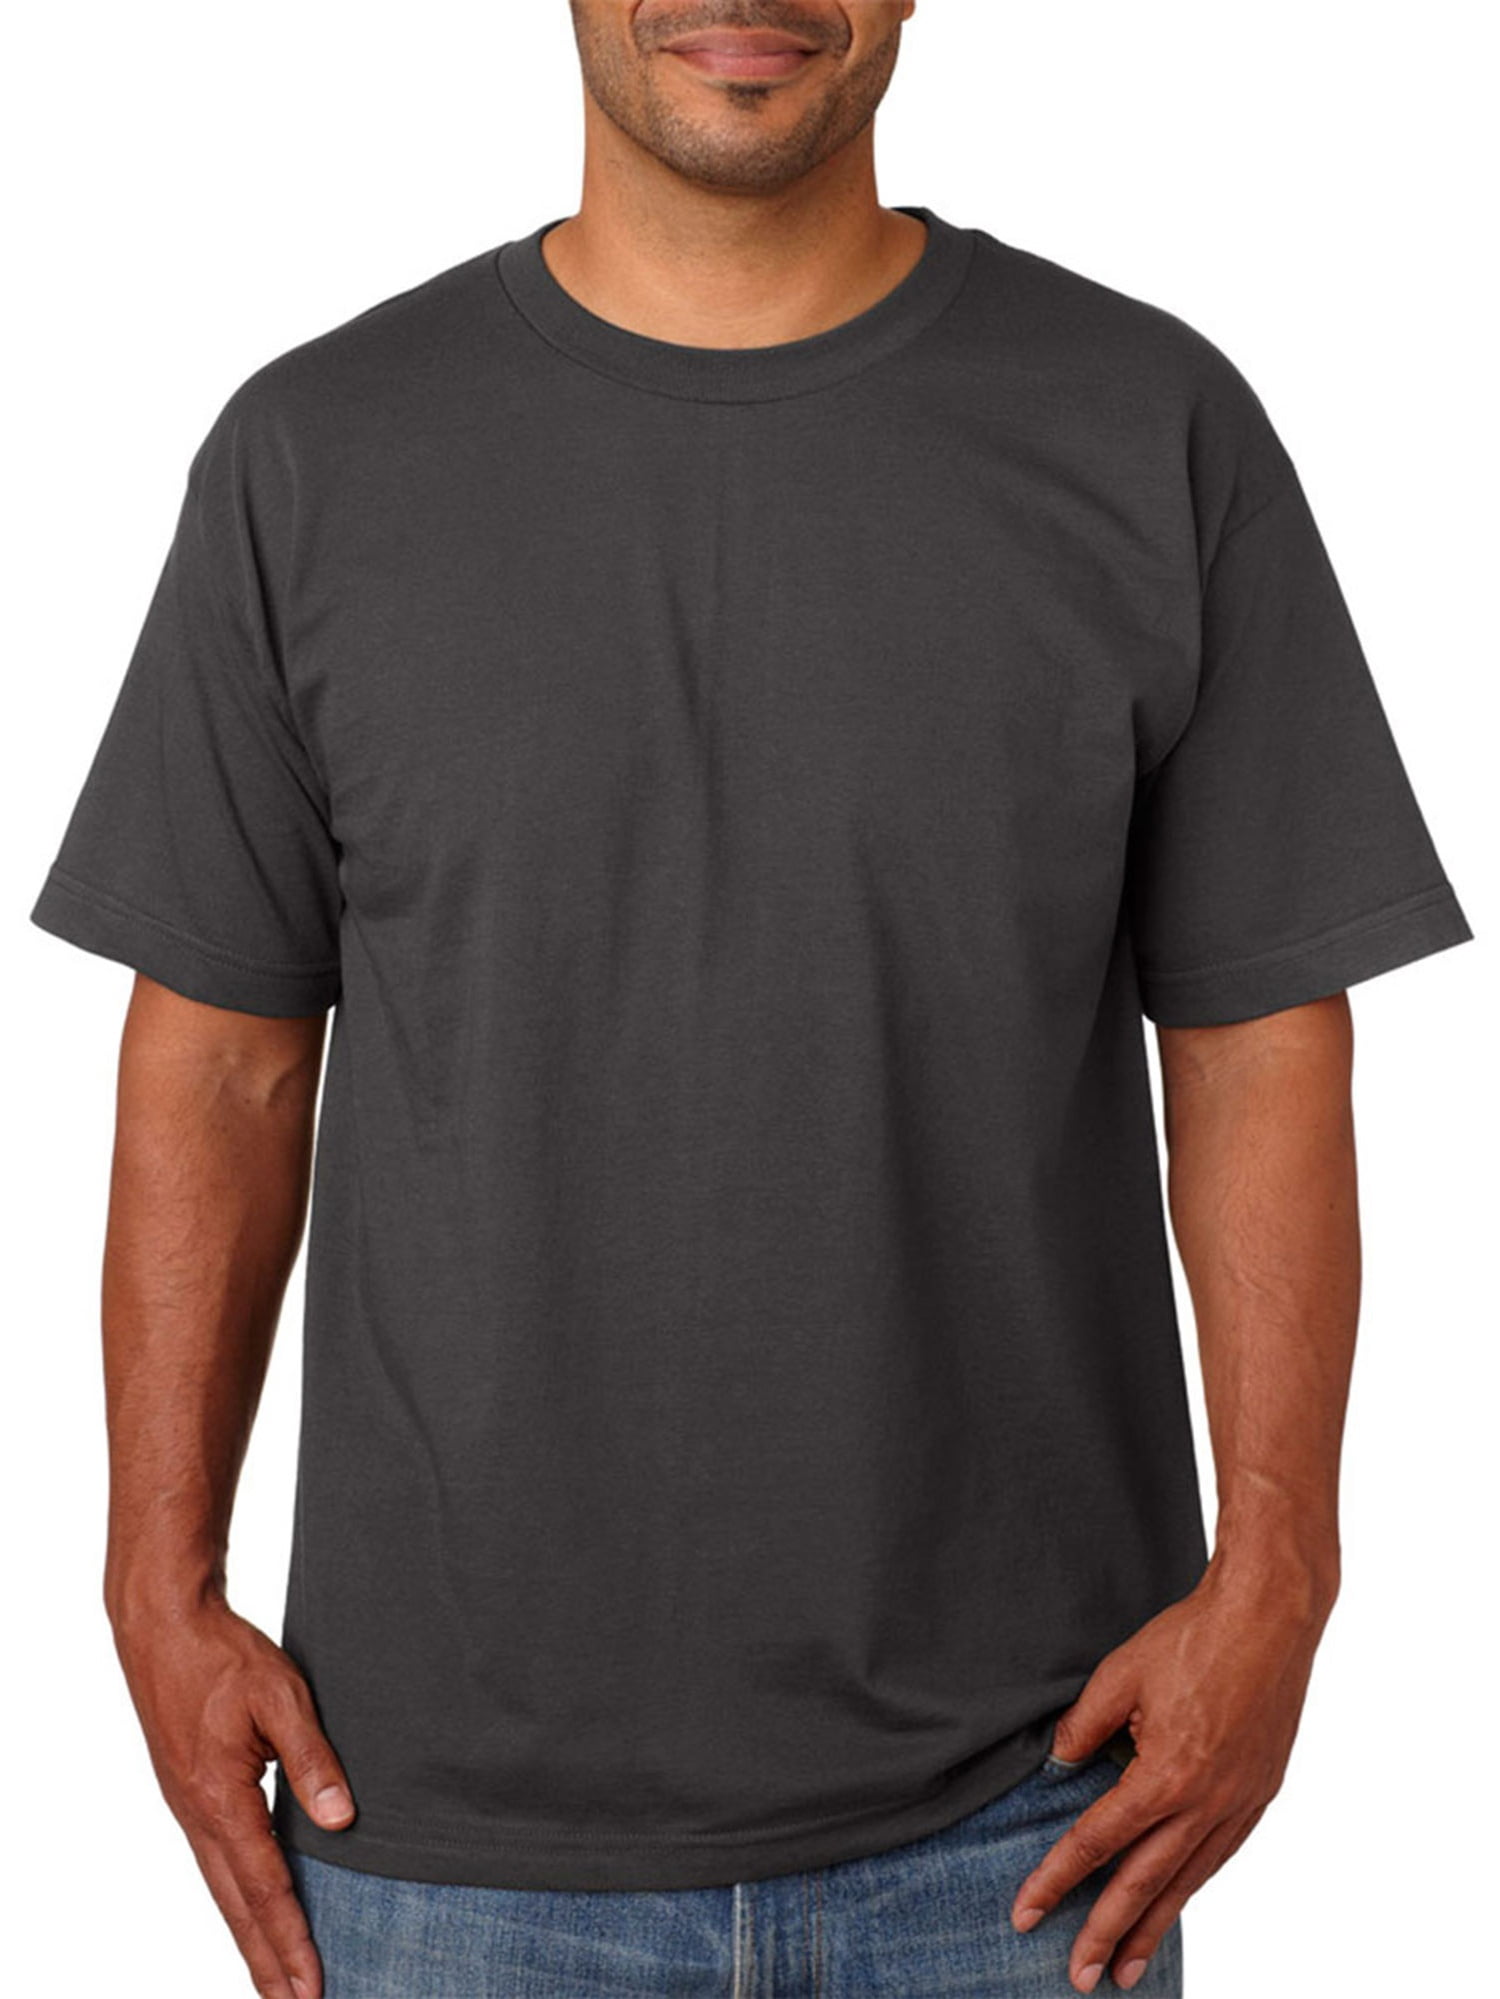 XXX-Large Pack of 5 Black Bayside Adult Tee with Pocket